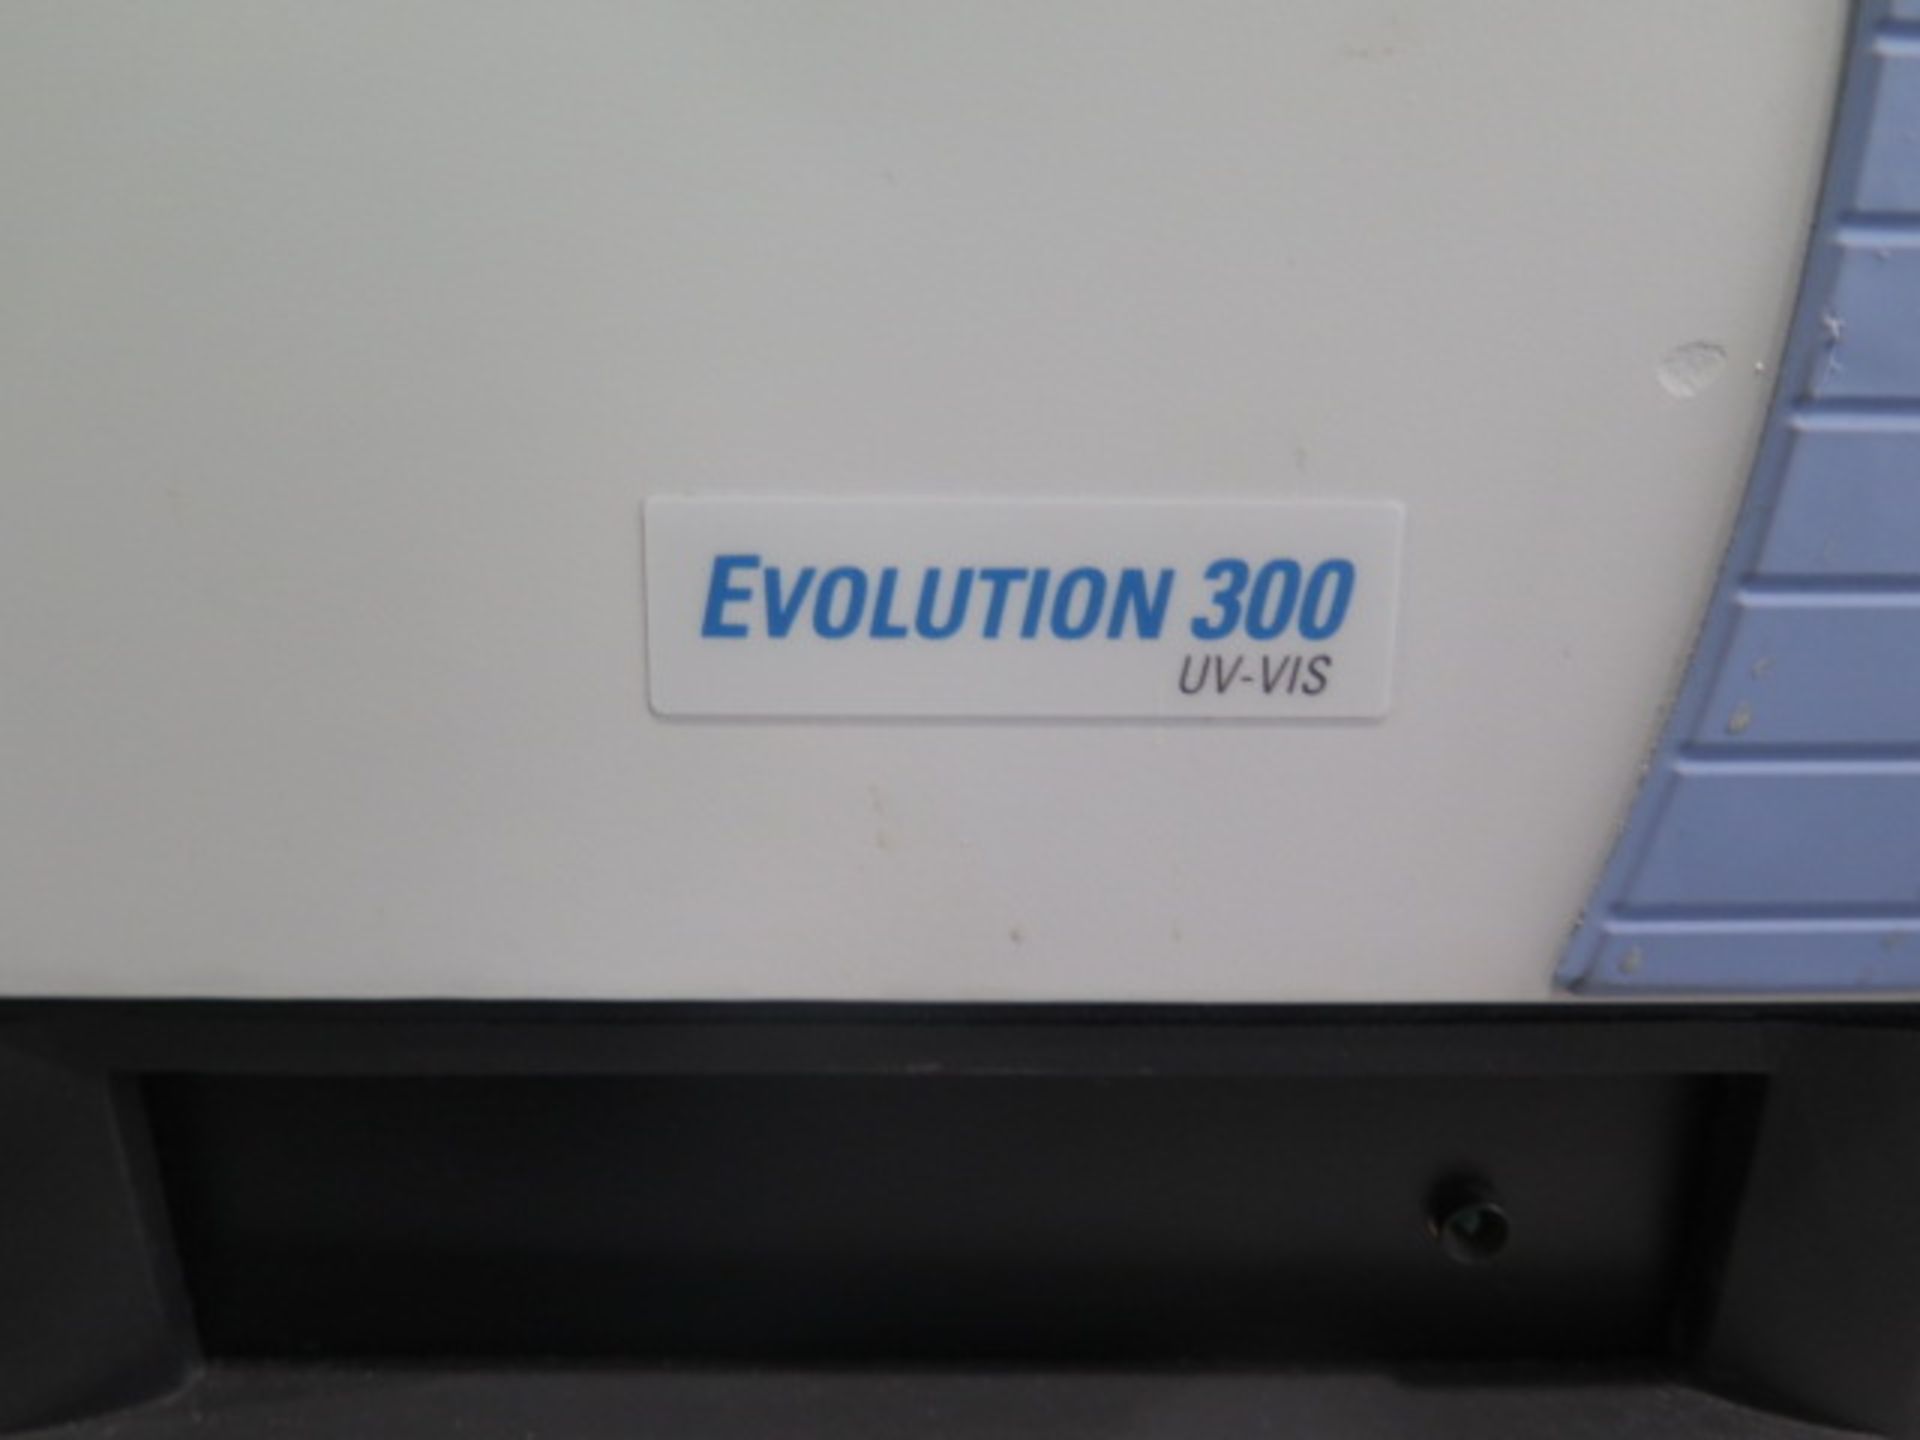 Thermo Scientific Evolution 300 UV-VIS Spectrophotometer s/n EVOU308001 (SOLD AS-IS - NO WARRANTY) - Image 7 of 8